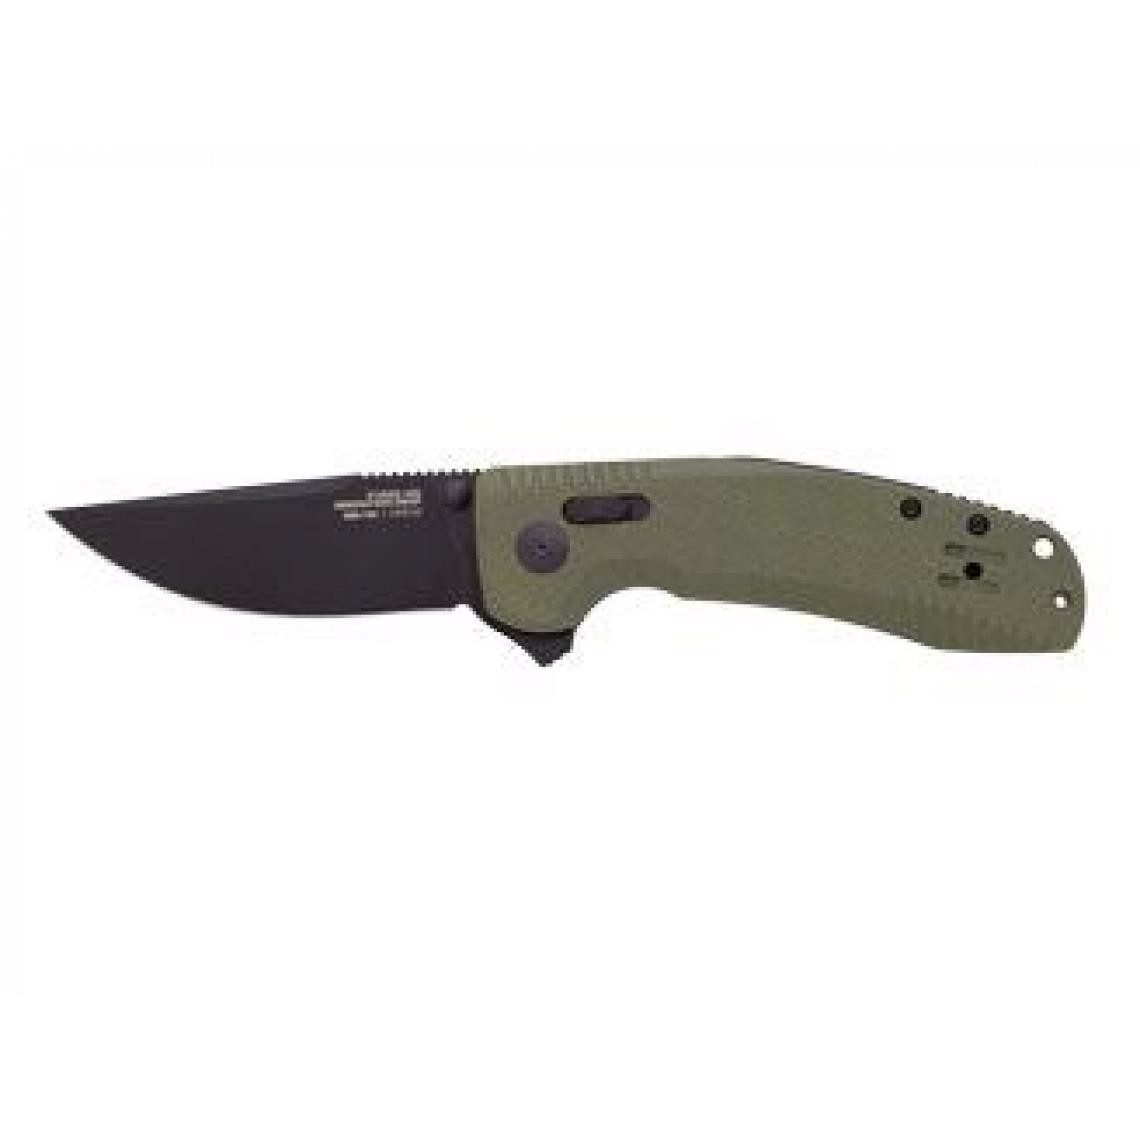 Divers Marques - Sog TAC XR OD GREEN 12-38-02-57 - Outils de coupe